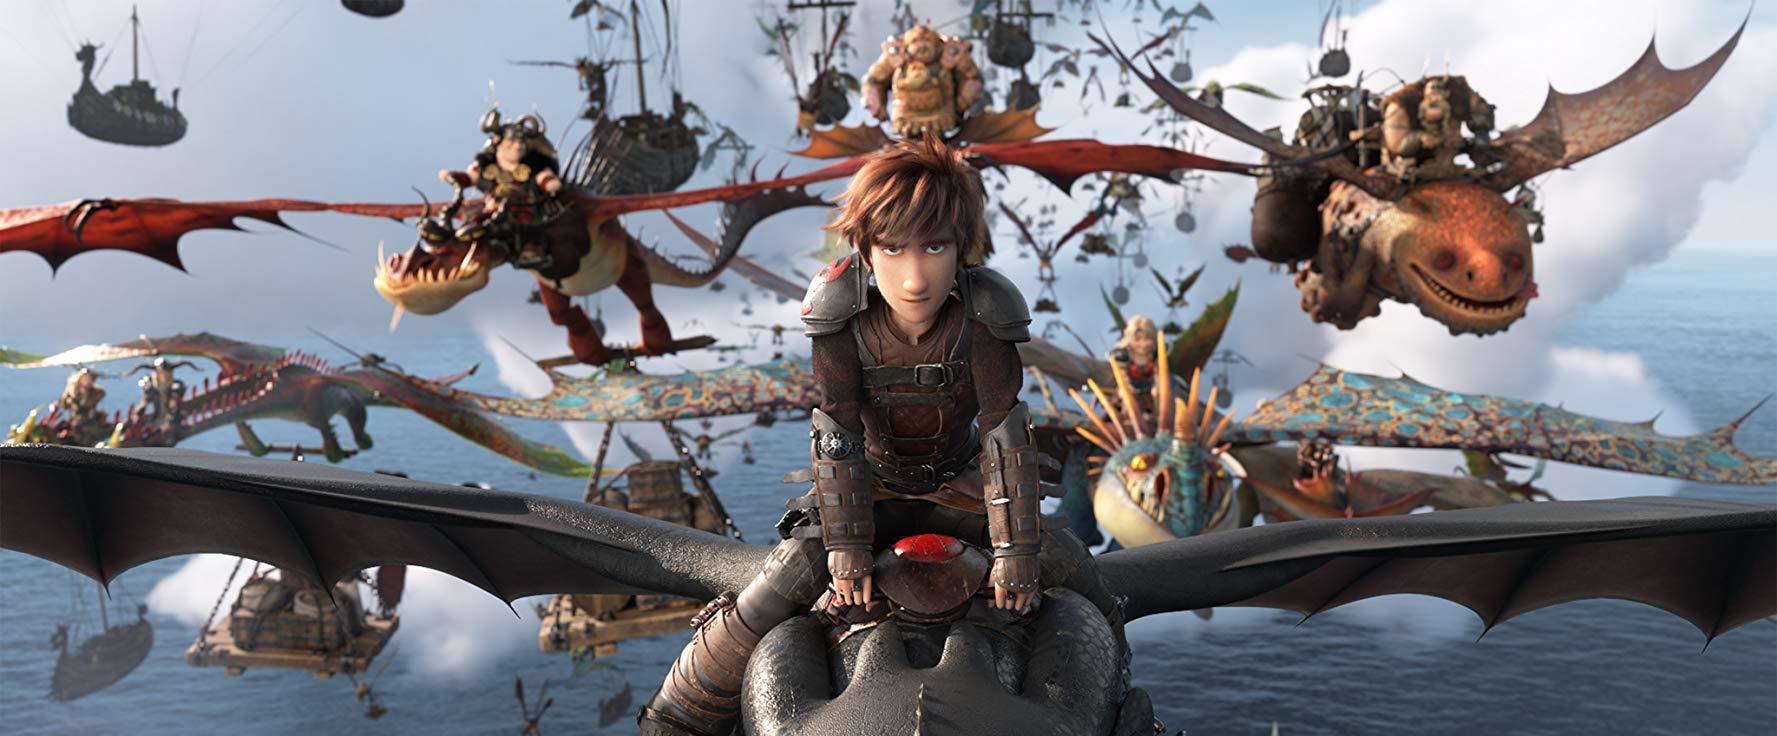 boom reviews how to train your dragon 3